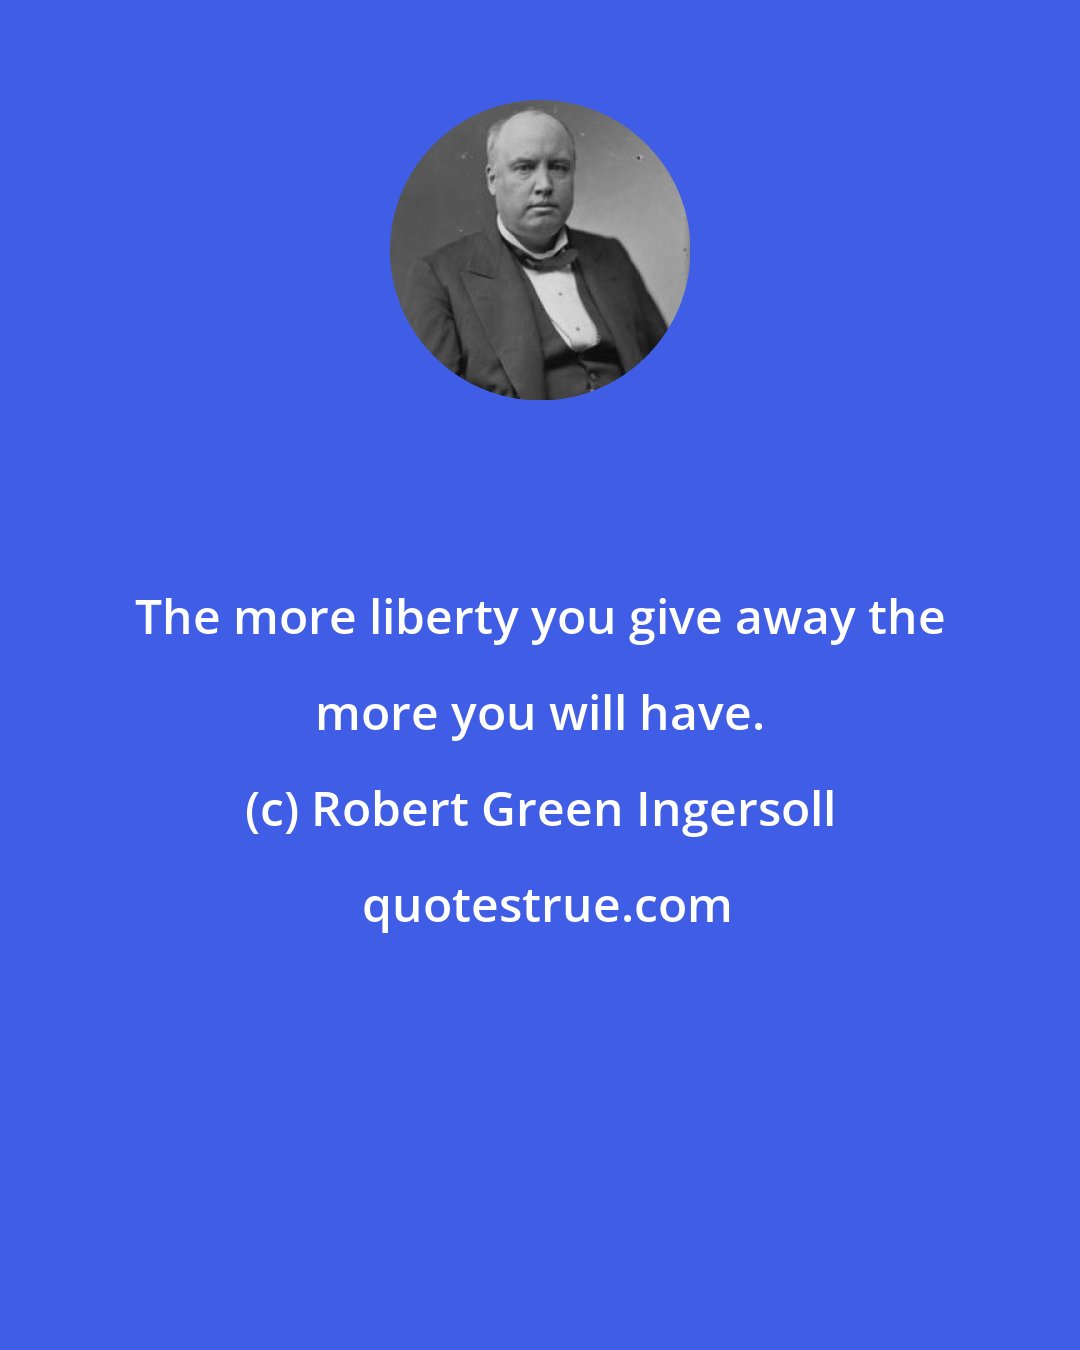 Robert Green Ingersoll: The more liberty you give away the more you will have.